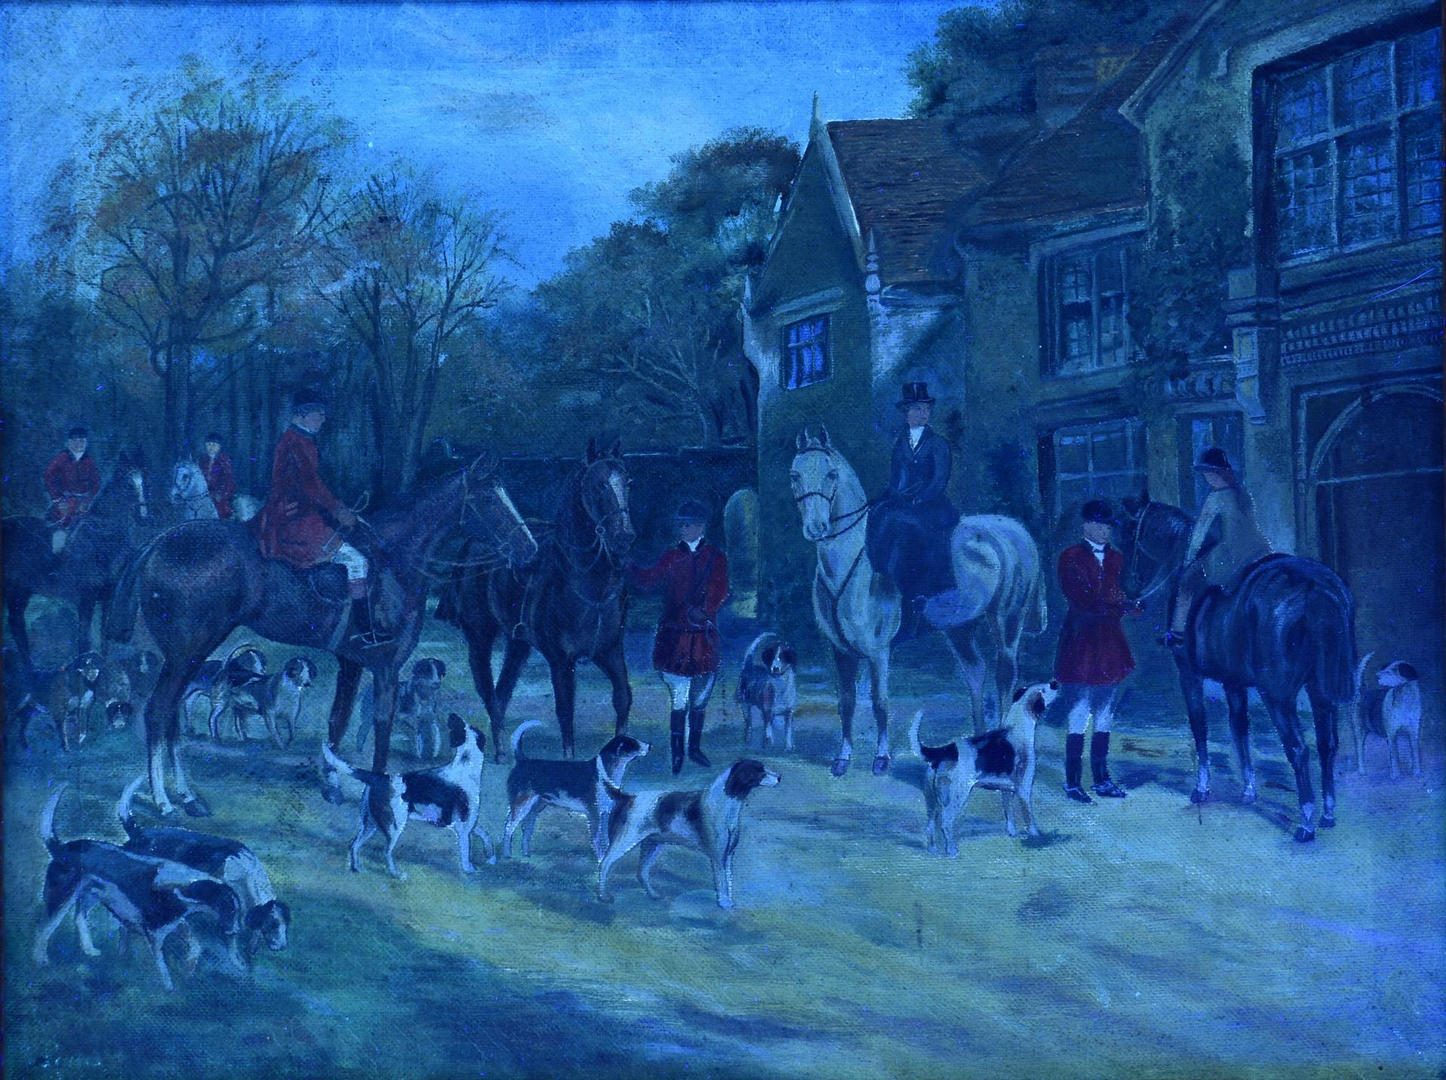 Lot 436: English Oil on Canvas Hunting Scene